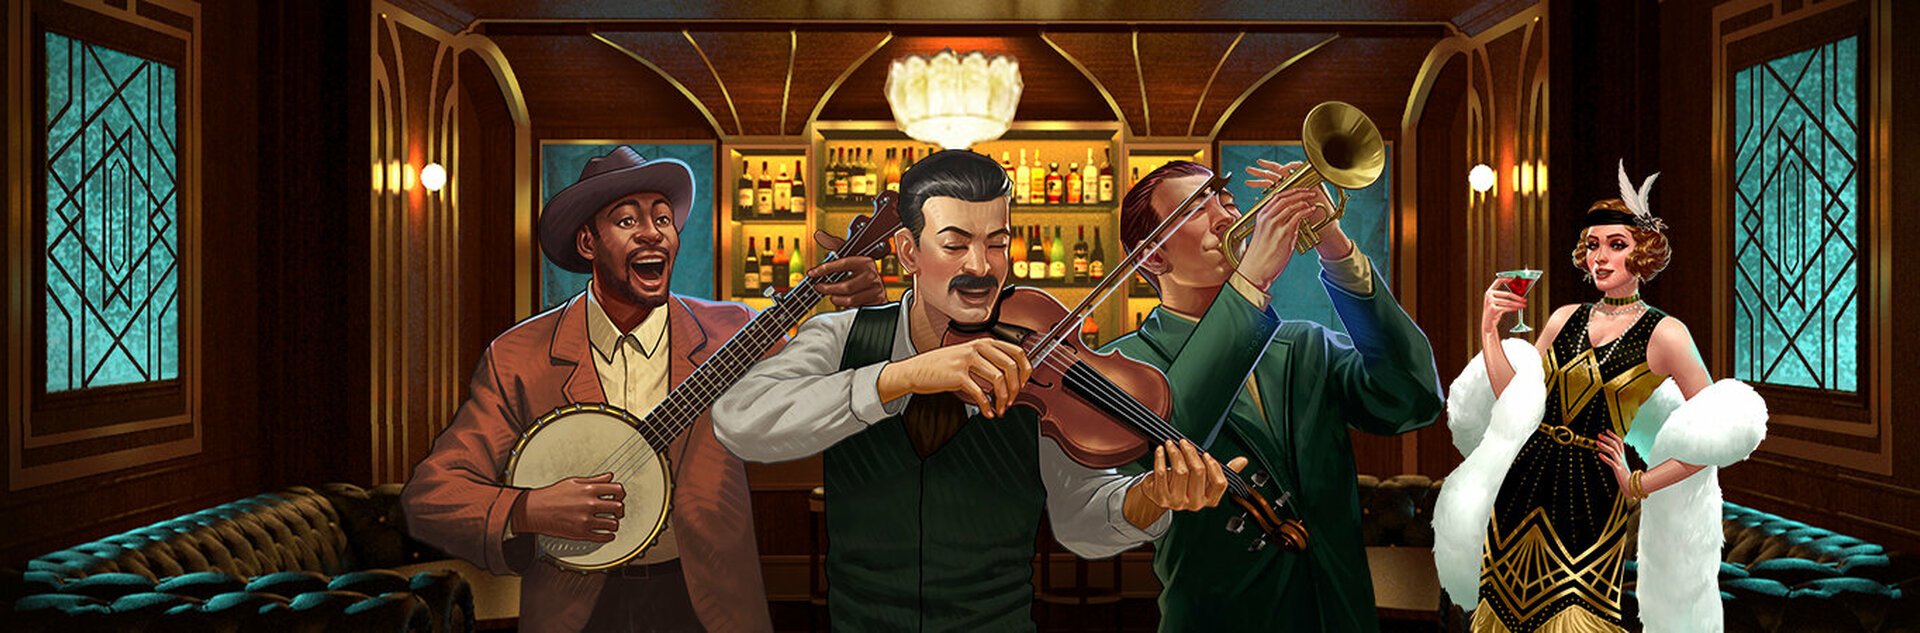 Play The Paying Piano Club Free Slot